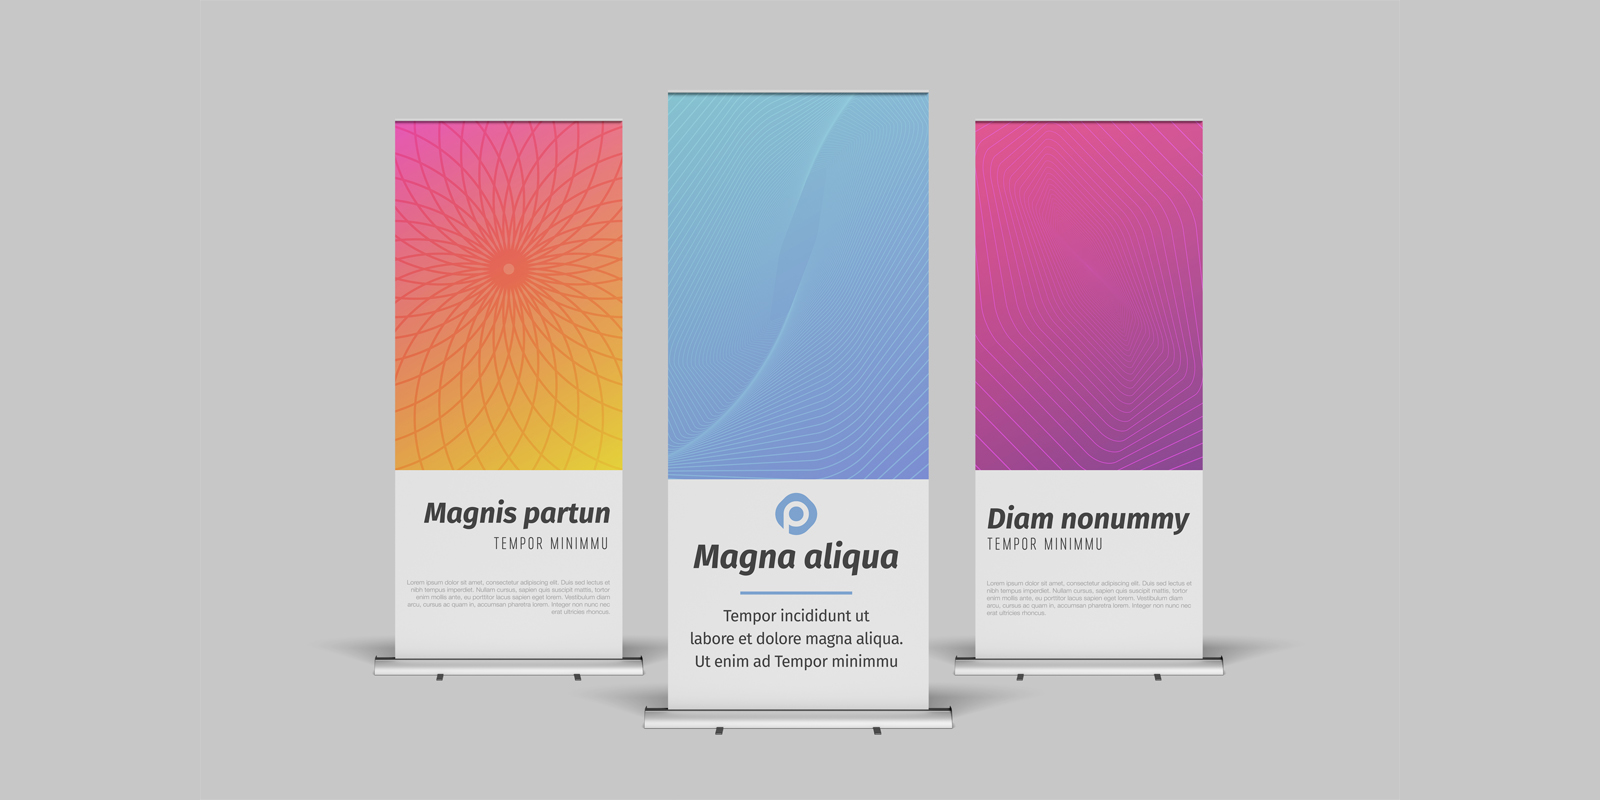 Roller banners in Valencia - Print with Pagerr